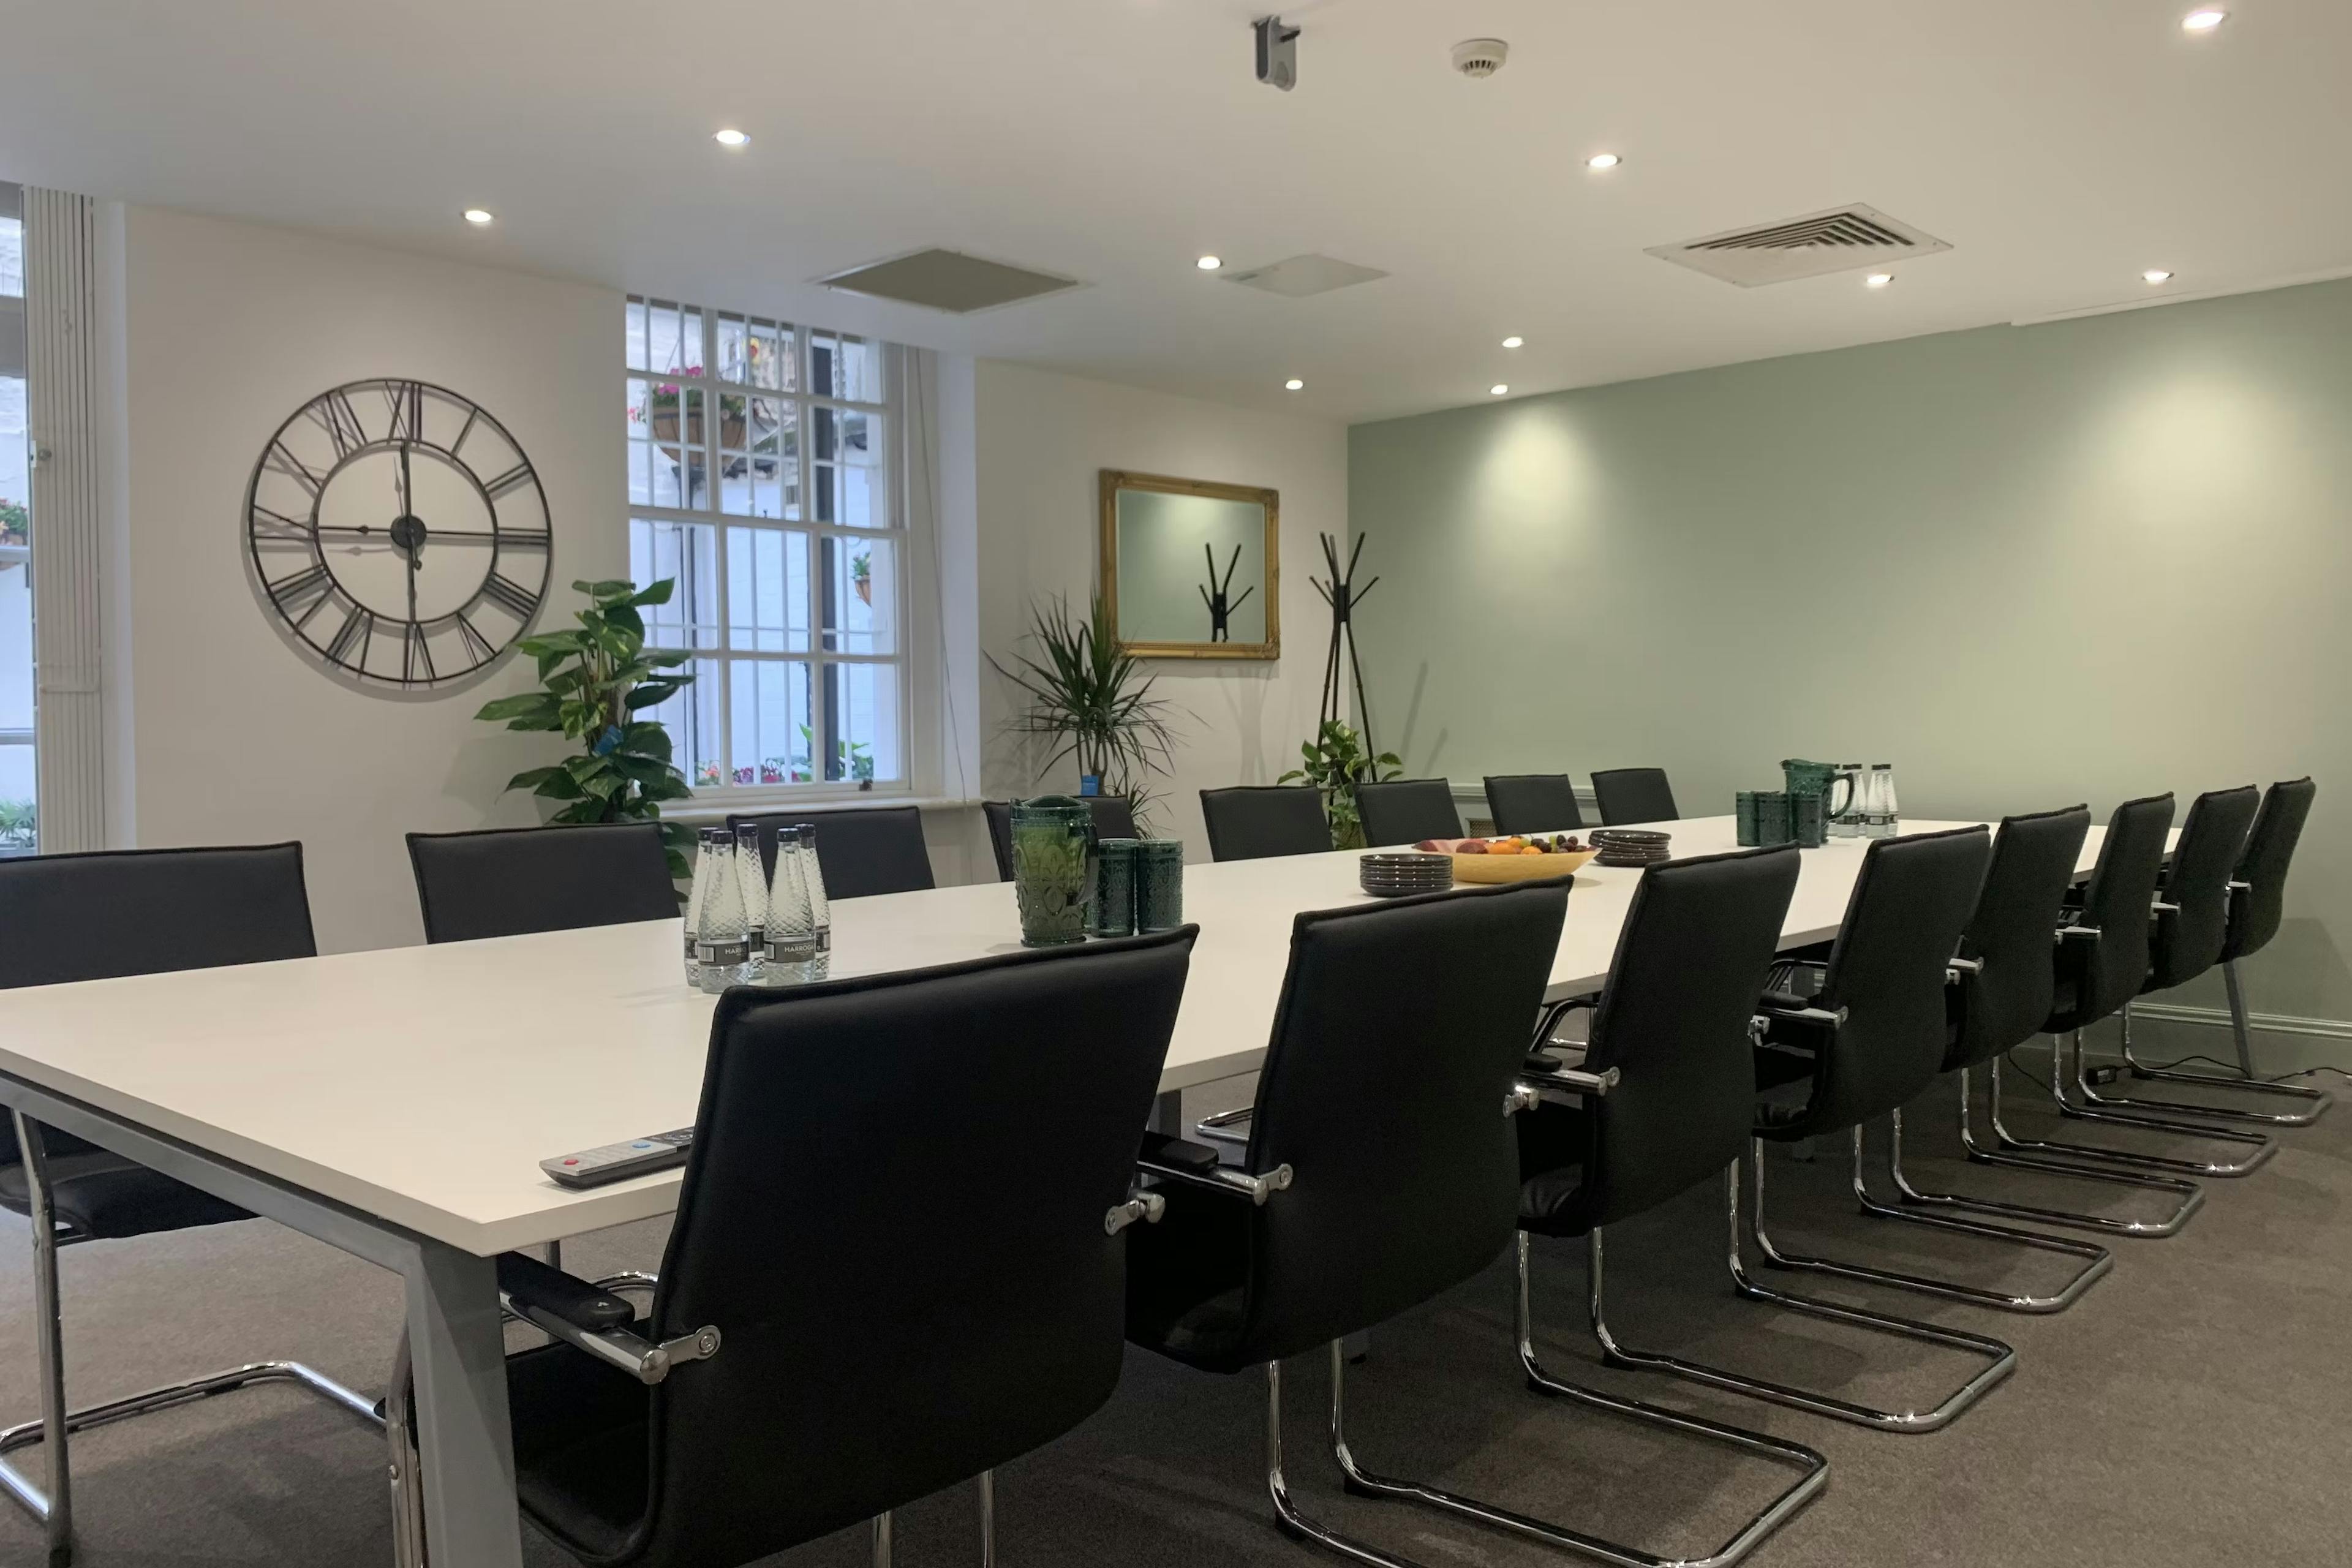 Westminster - 6 Person Office - Victoria Palace Street